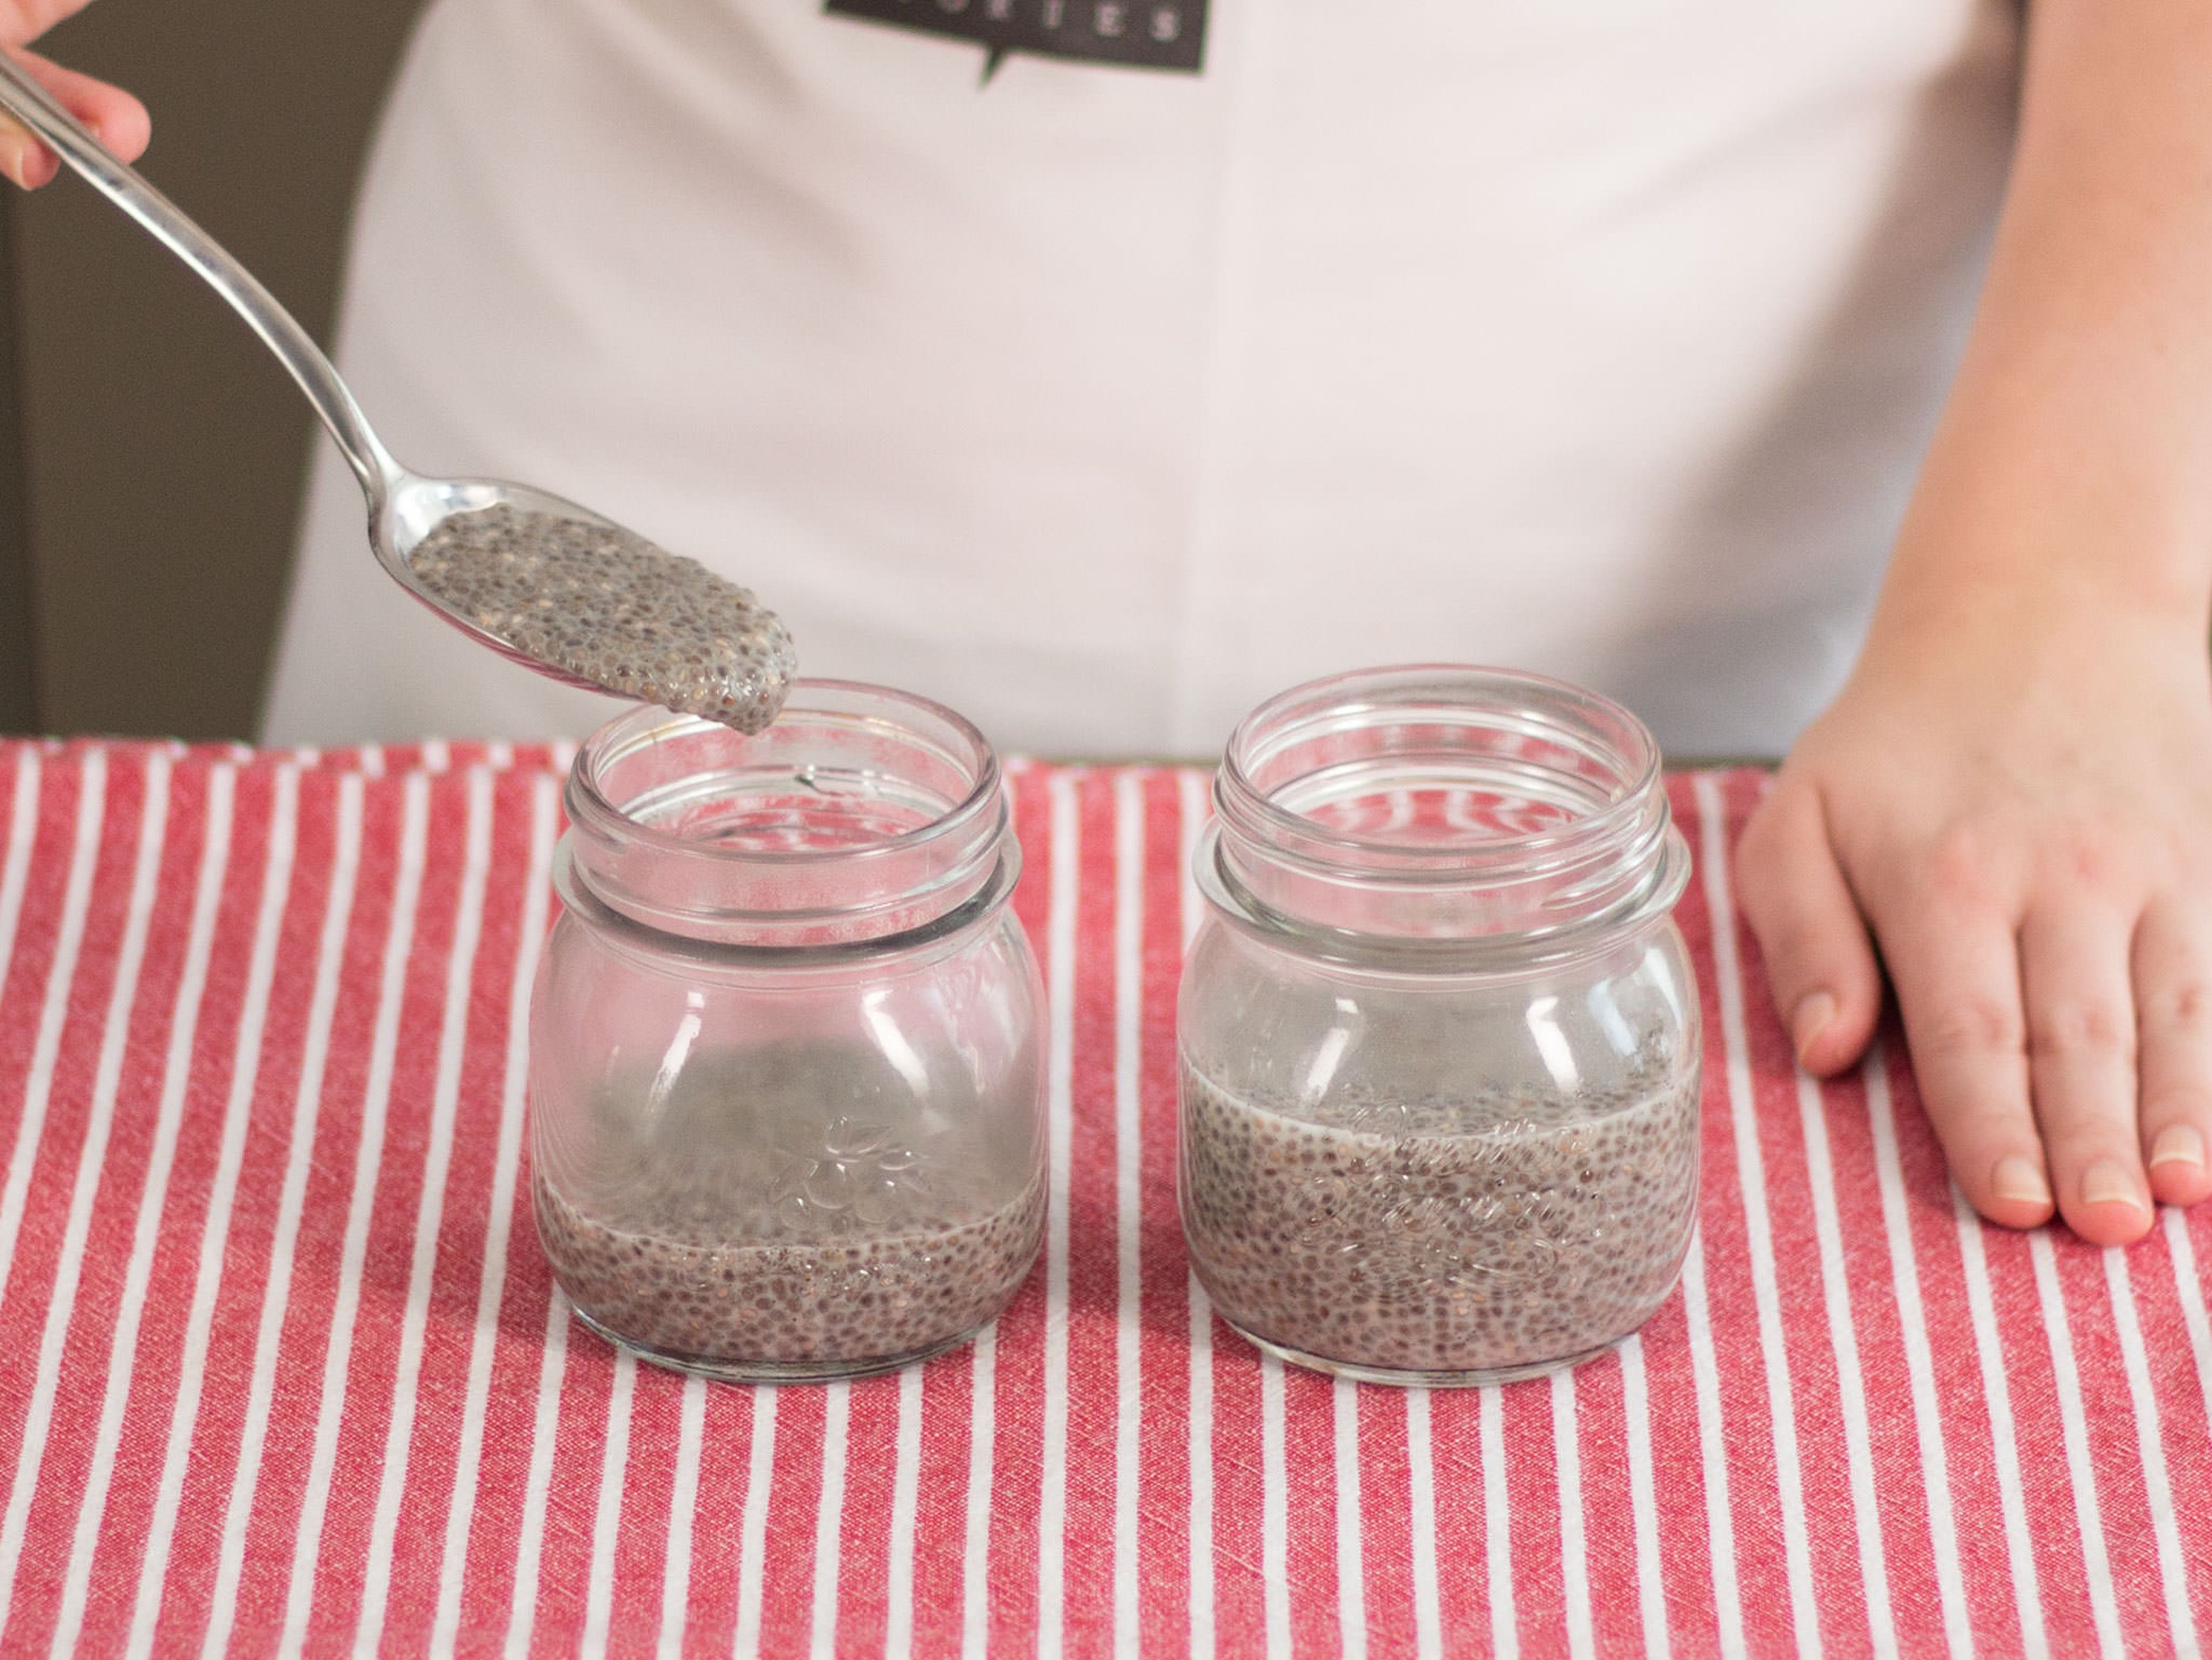 Spoon chia pudding into jars for serving.